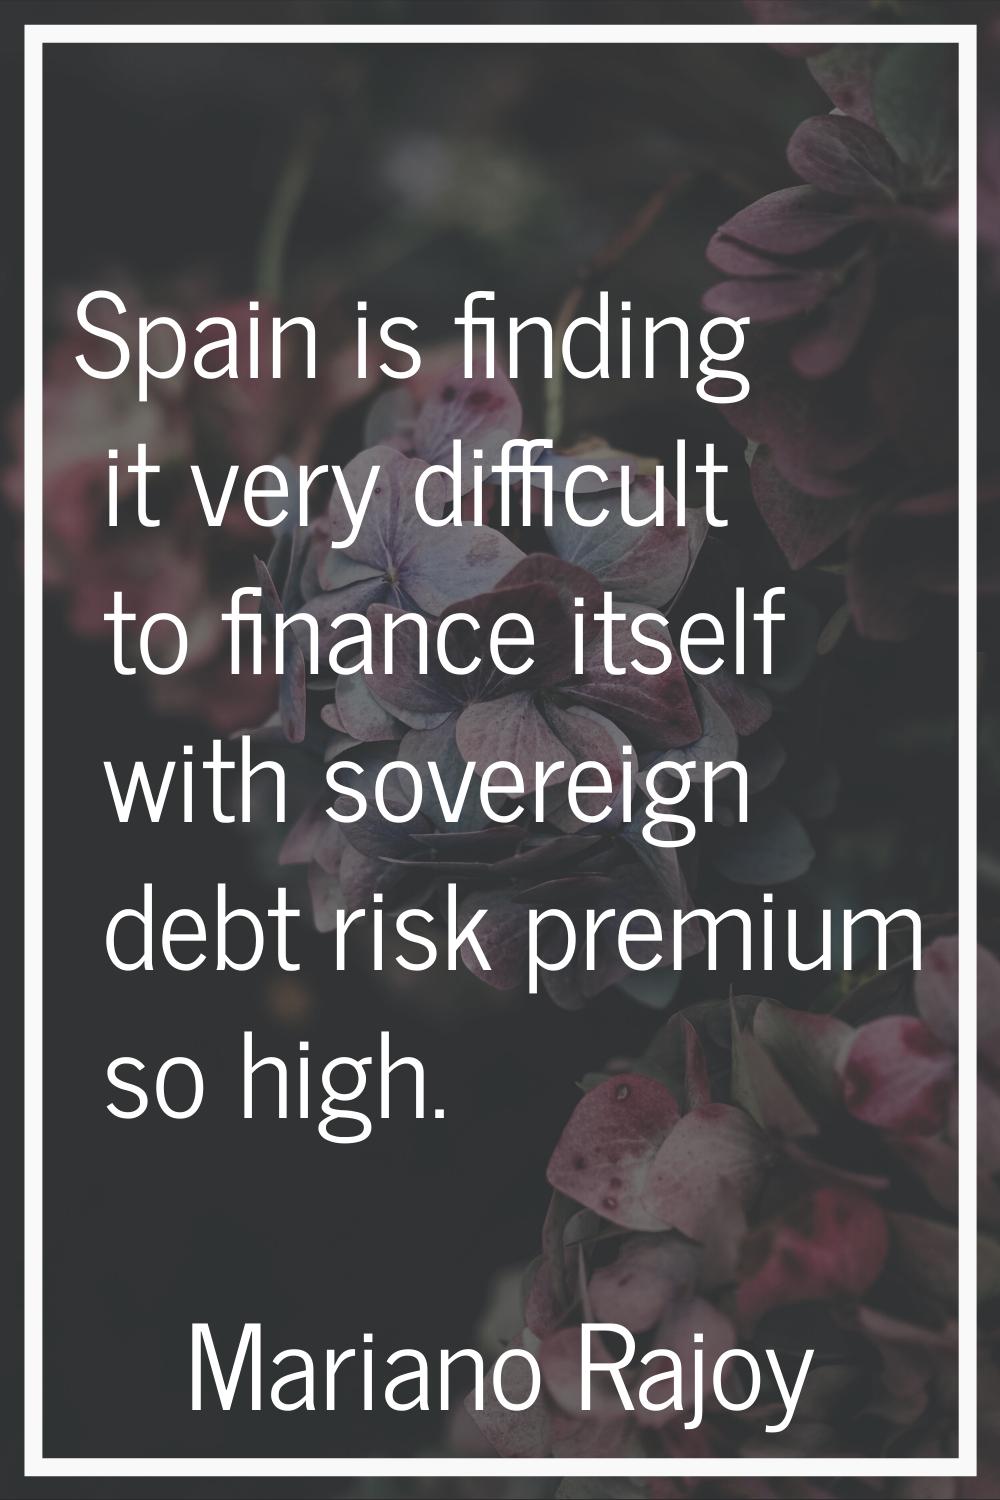 Spain is finding it very difficult to finance itself with sovereign debt risk premium so high.